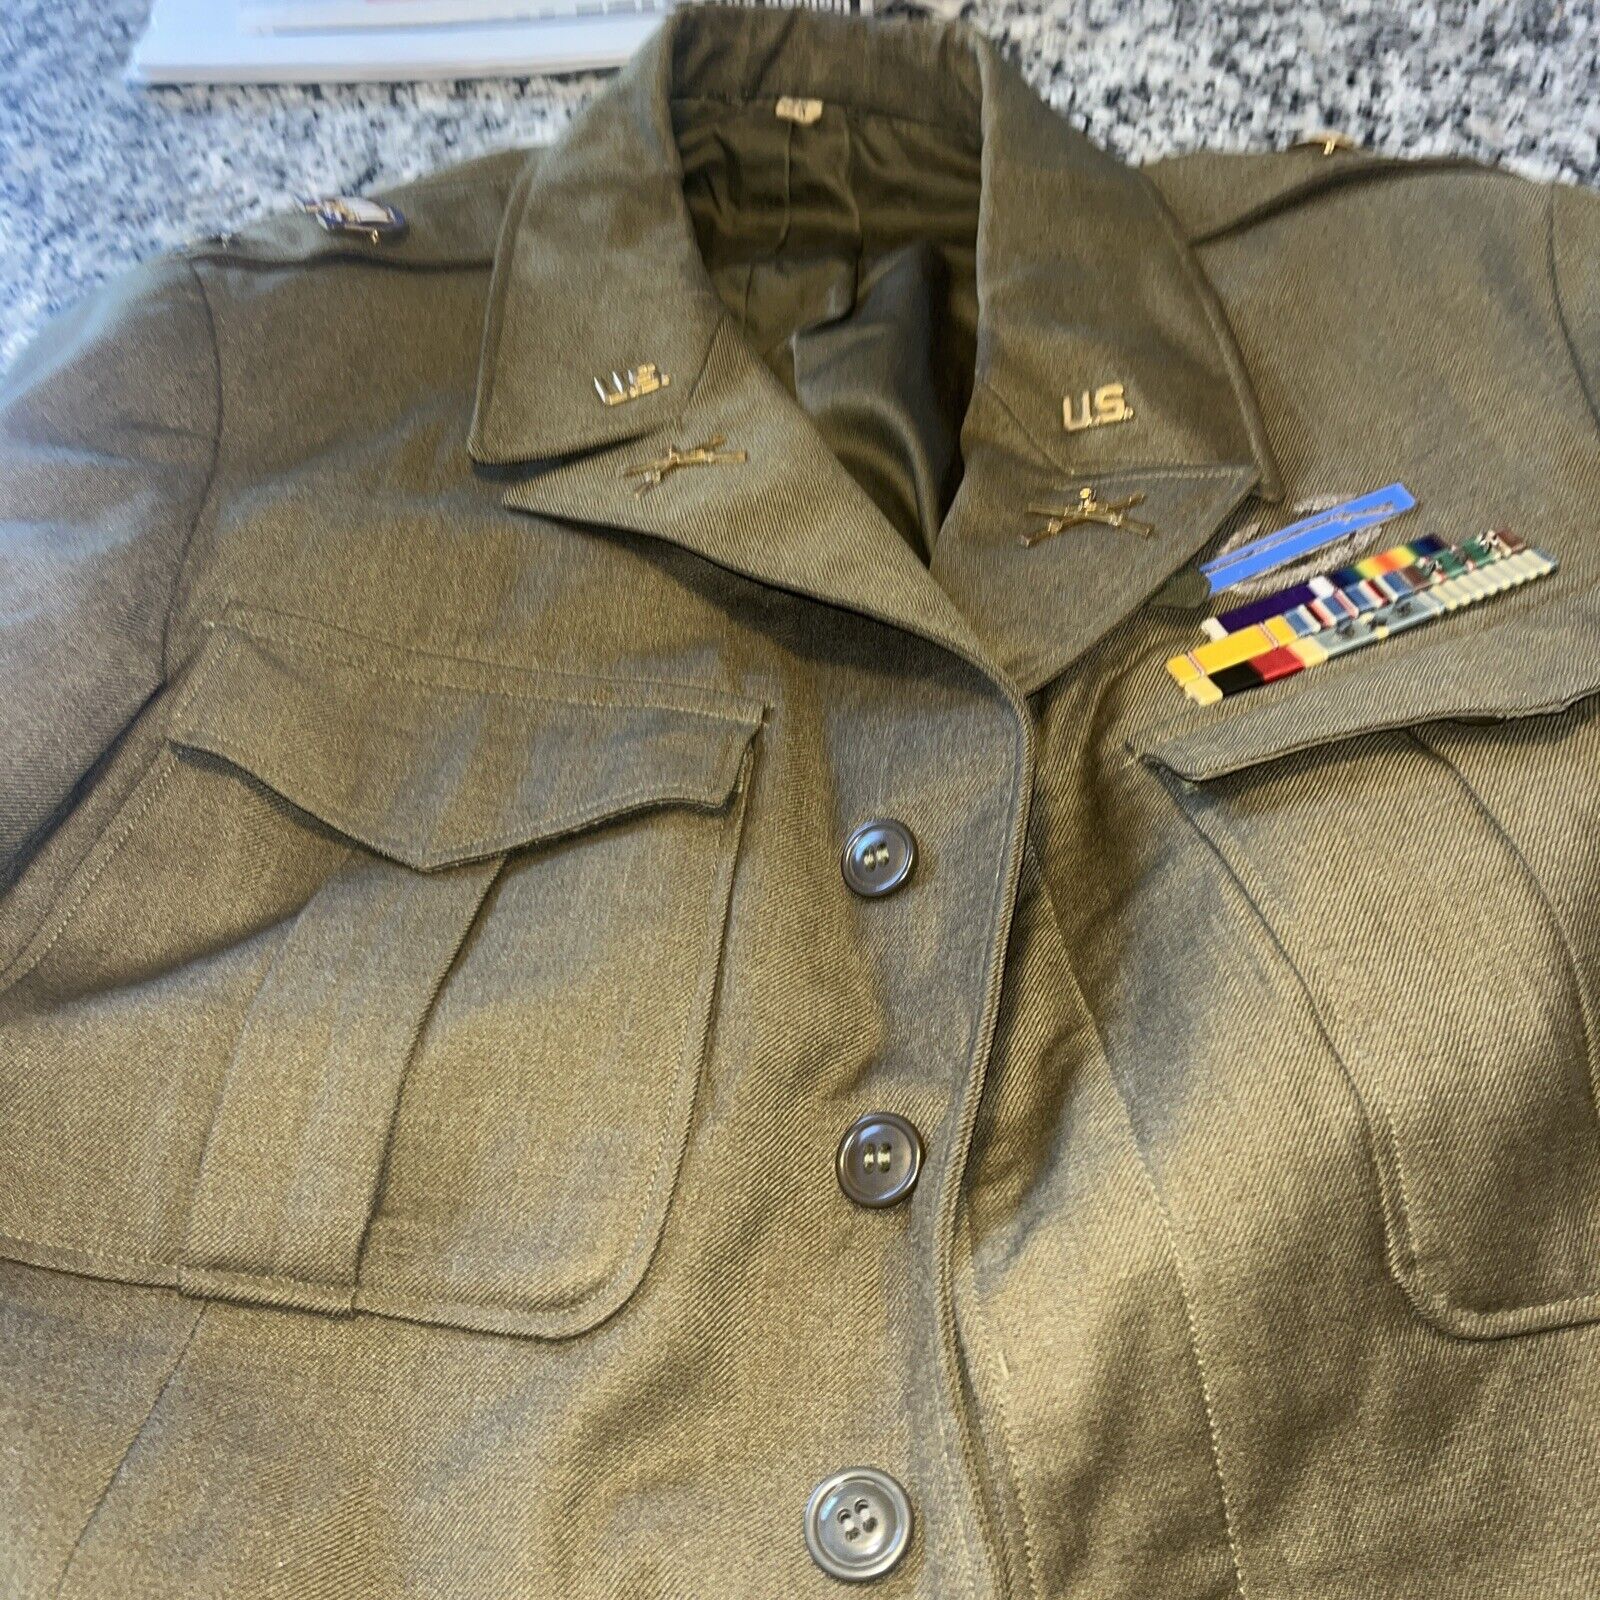 3 War US Colonel Ike Jacket 3rd Division